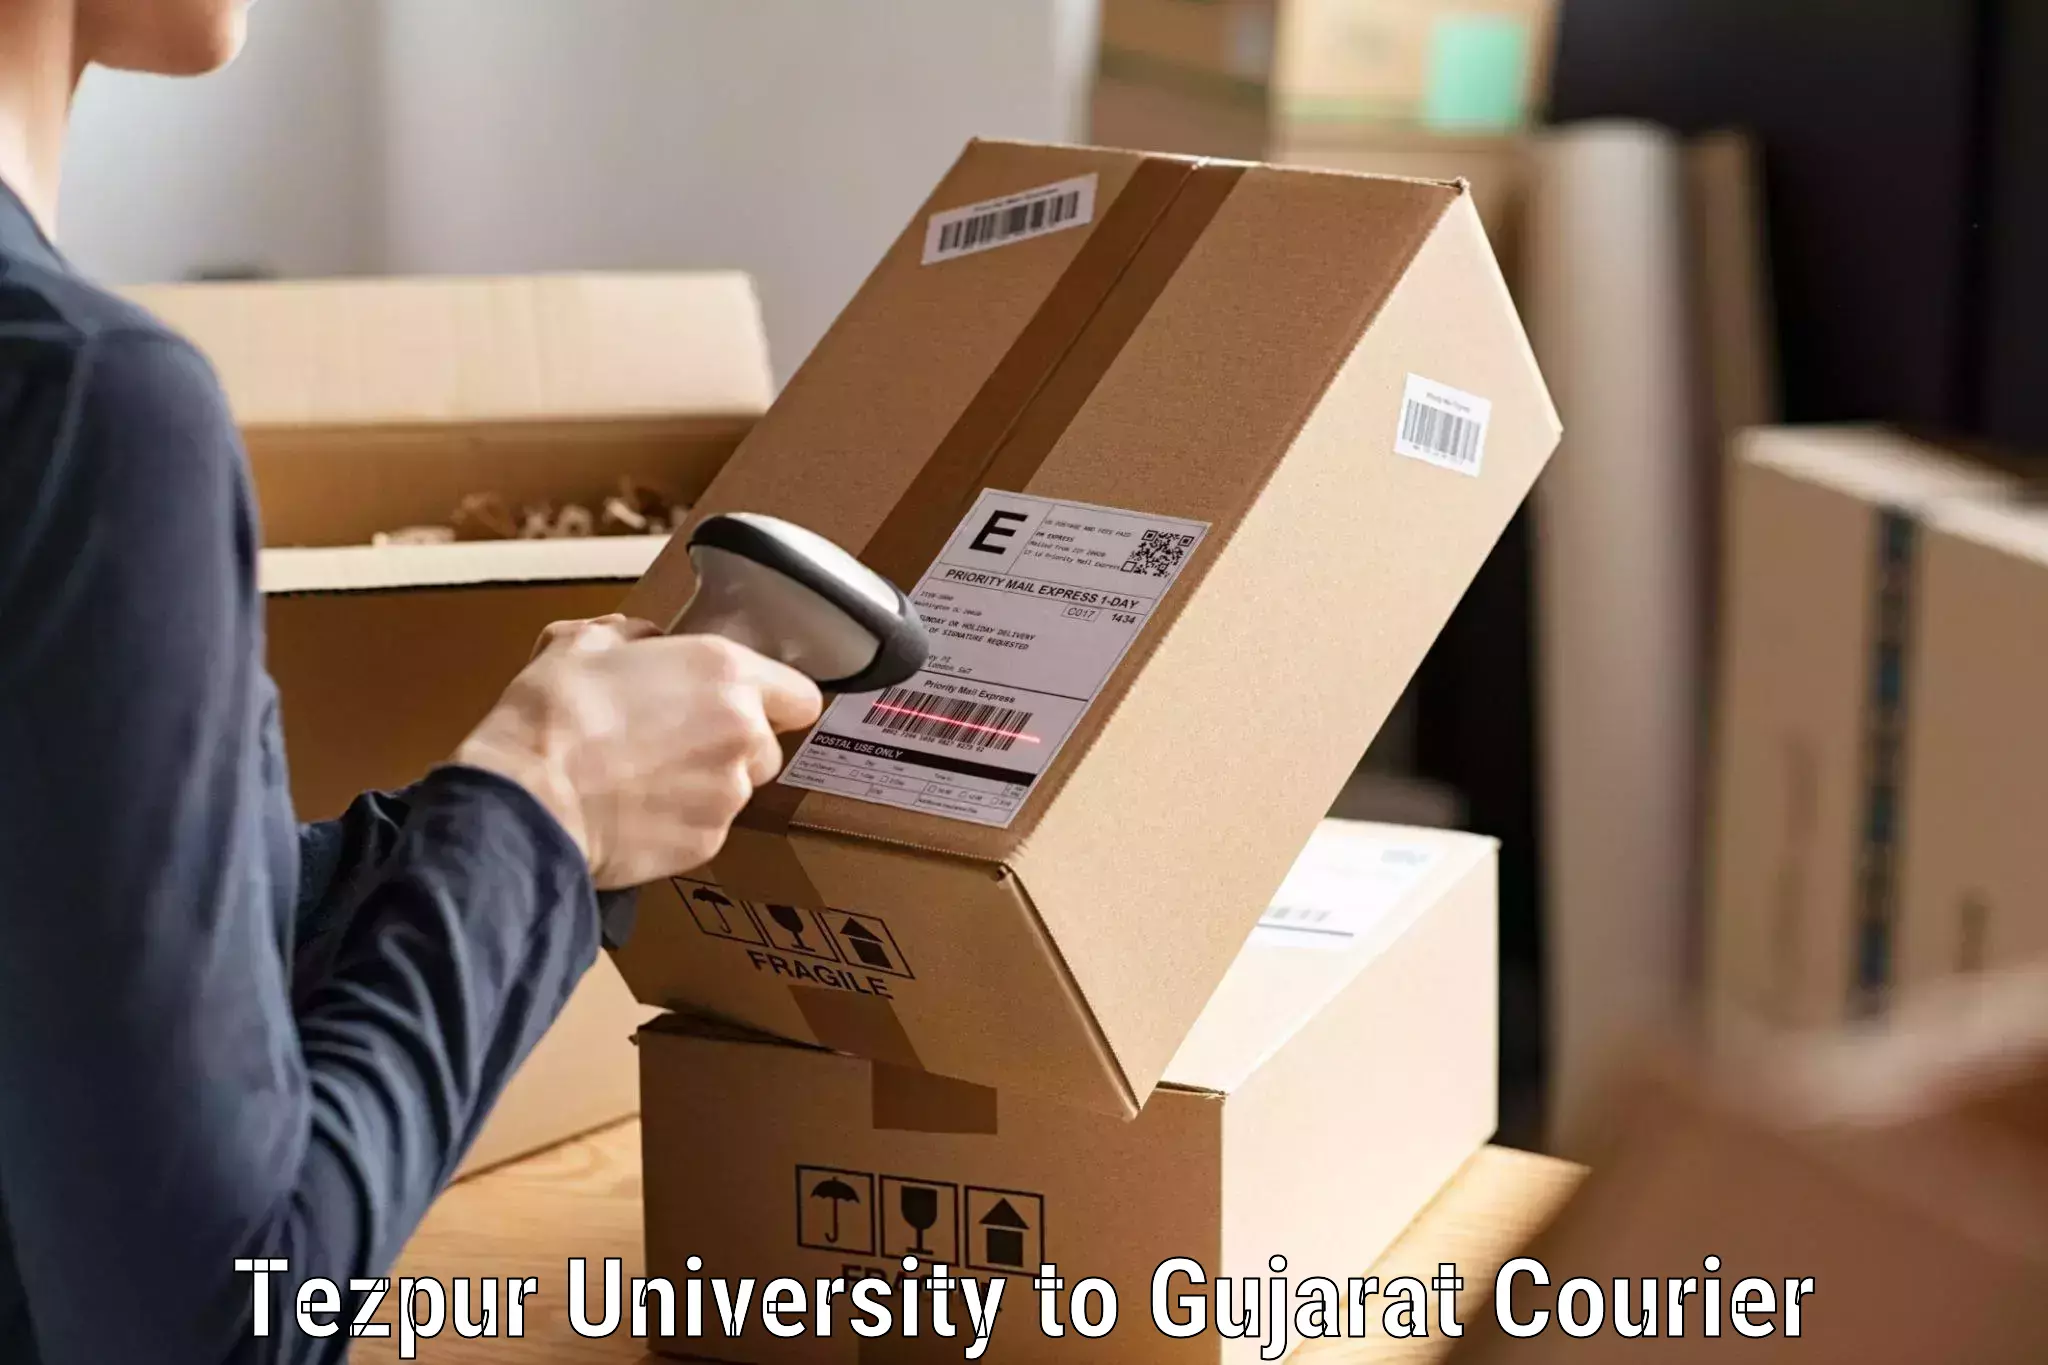 Fast delivery service Tezpur University to Vyara